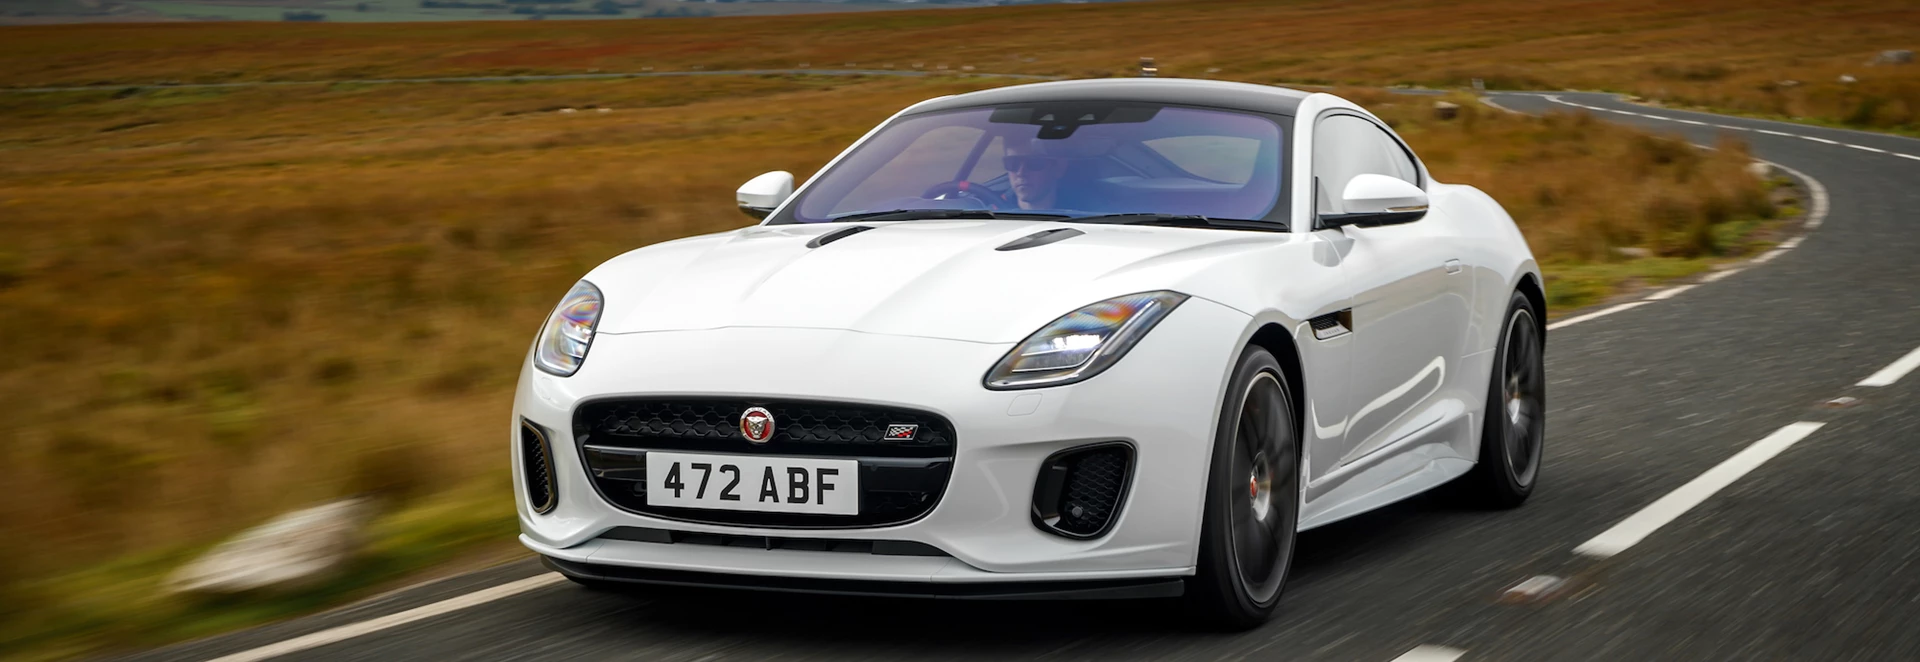 2020 Jaguar F-Type: What to expect